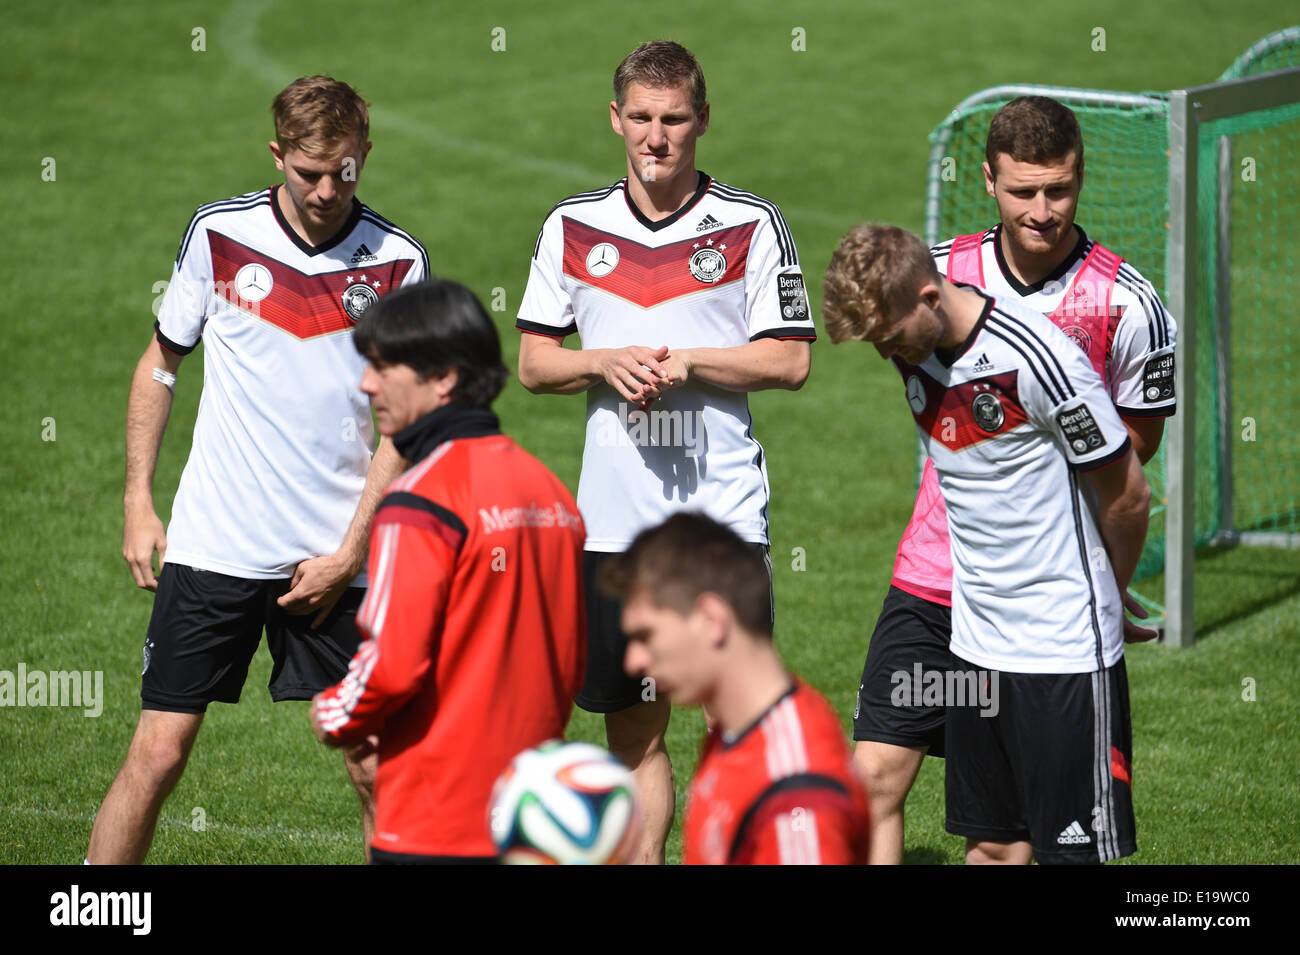 Passeier, Italy. 28th May, 2014. Christoph Kramer (from L), head coach Joachim Löw, Bastian Schweinsteiger, Andre Schuerrle and Shkodran Mustafi of the German national soccer team attend a training session on a training ground at St. Leonhard in Passeier, Italy, 28 May 2014. Germany's national soccer squad prepares for the upcoming FIFA World Cup 2014 in Brazil at a training camp in South Tyrol until 30 May 2014. Photo: Andreas Gebert/dpa/Alamy Live News Stock Photo